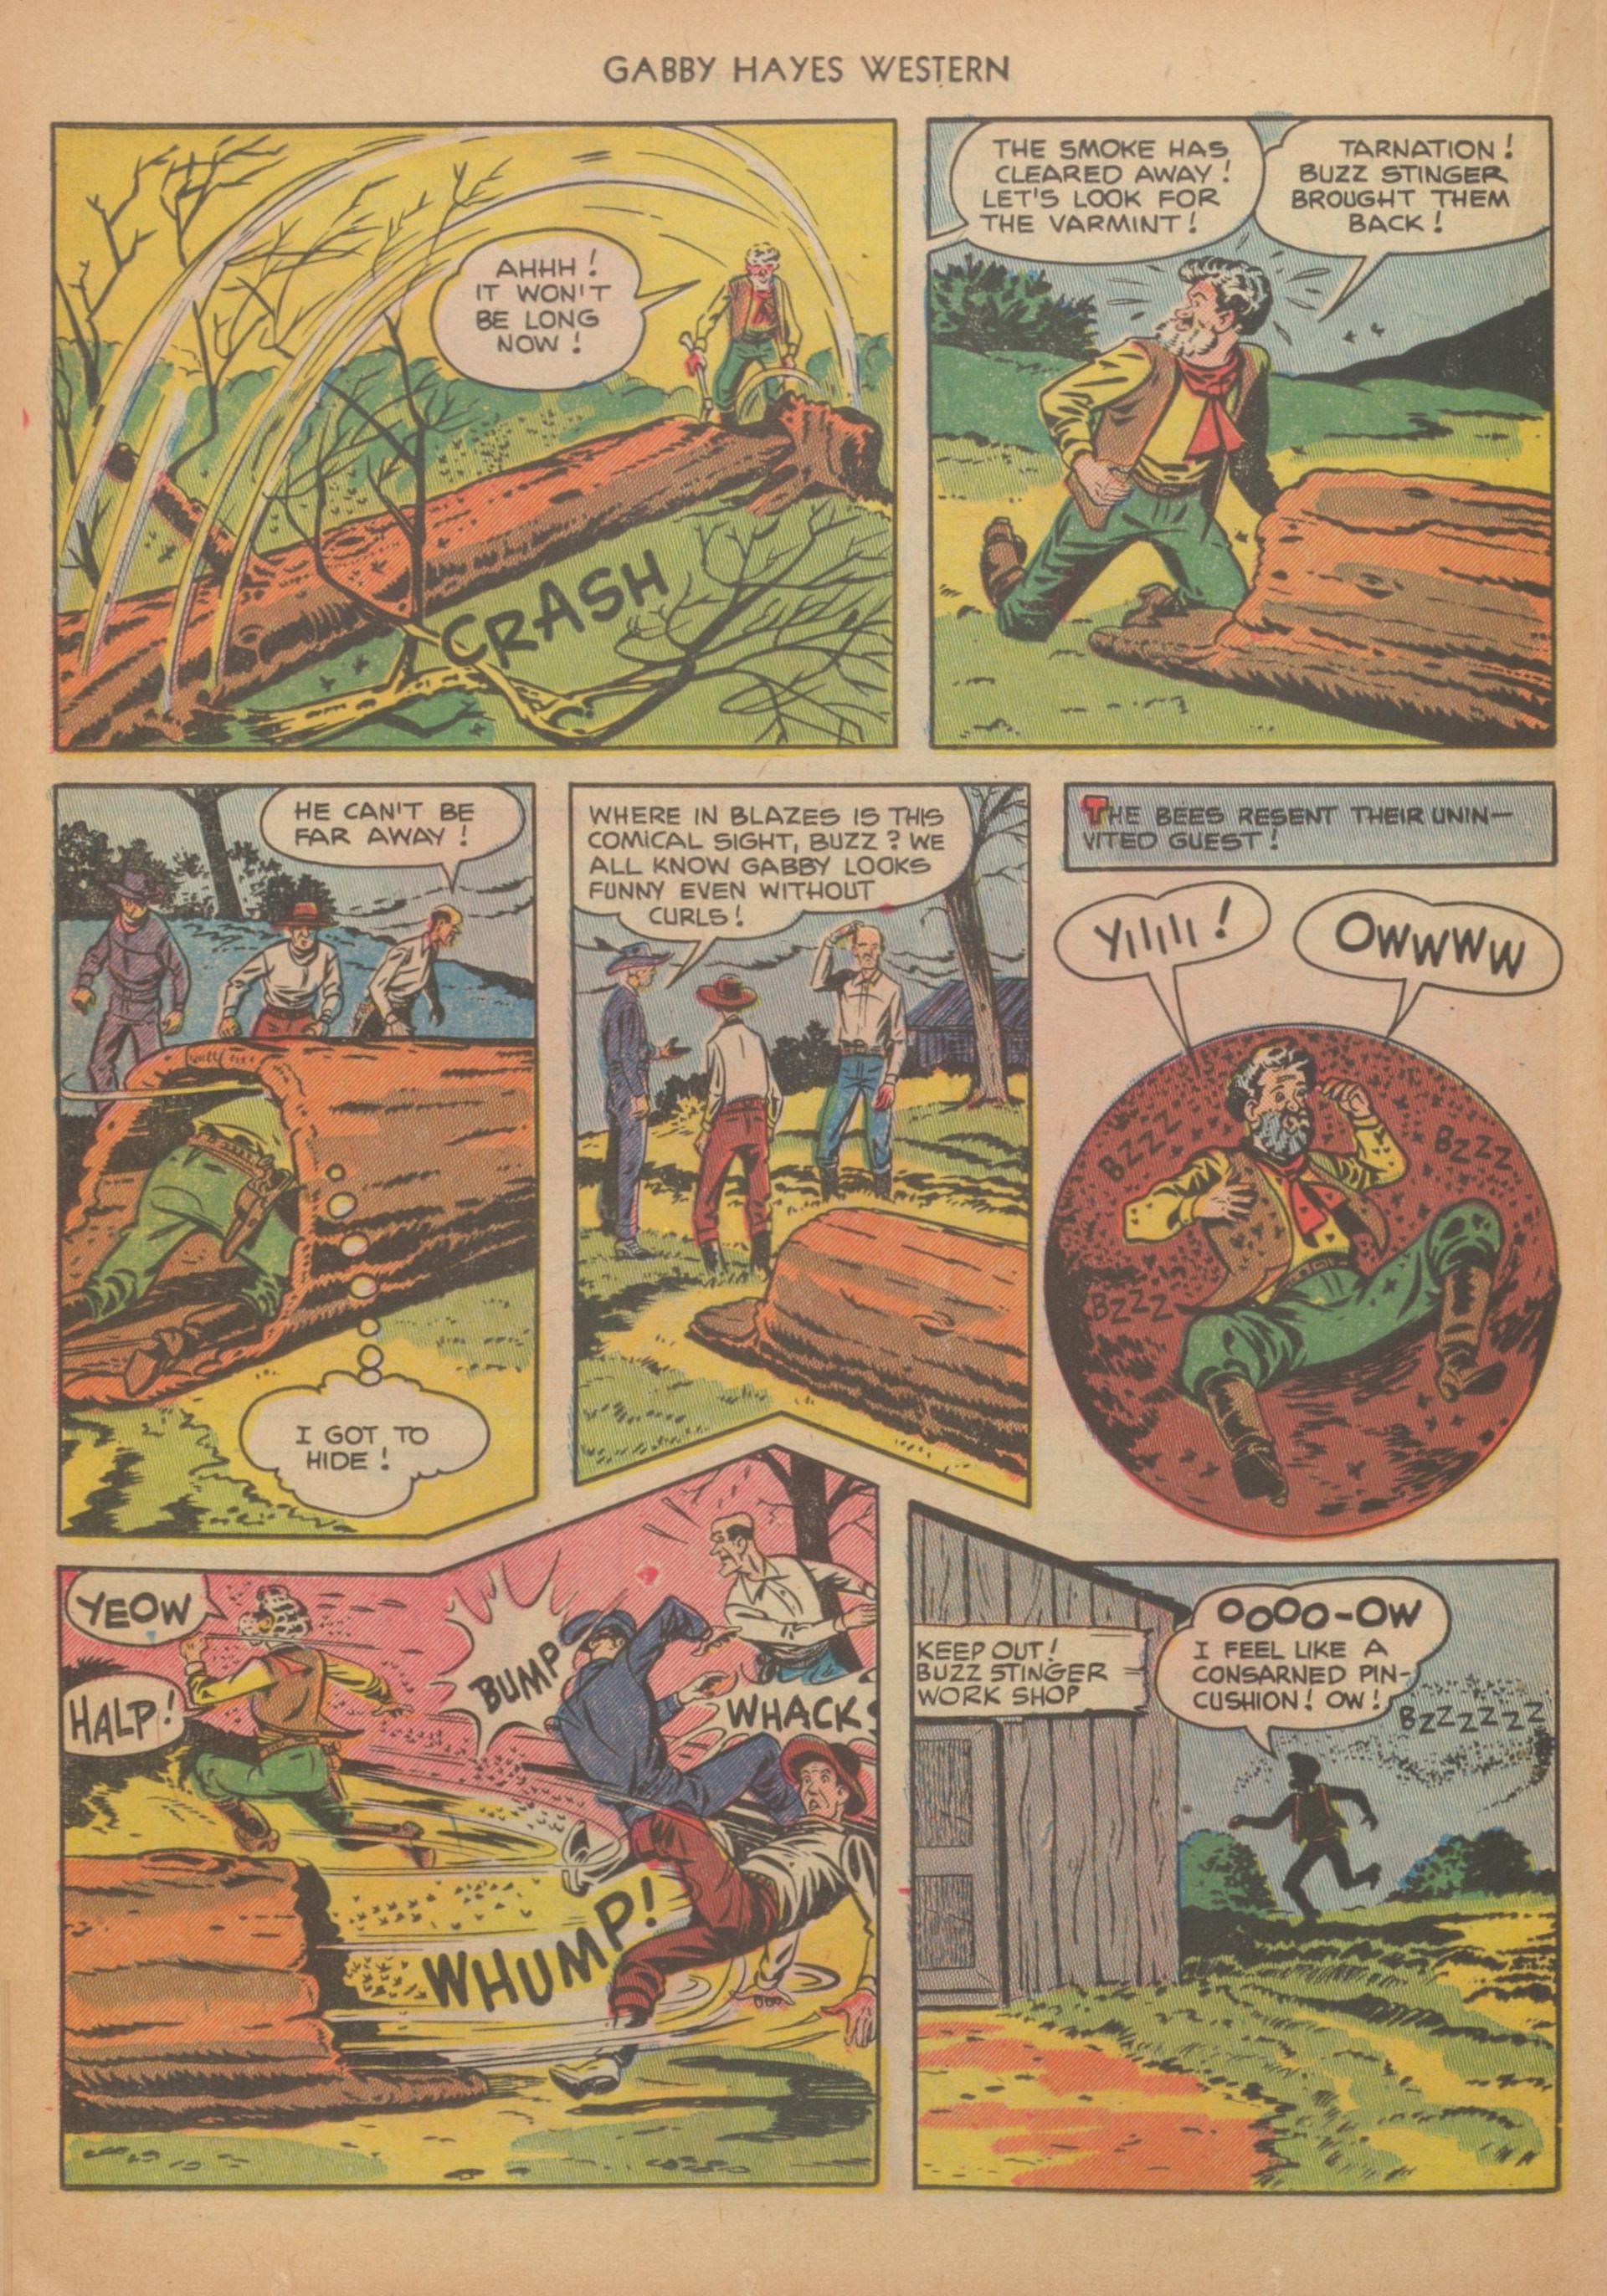 Read online Gabby Hayes Western comic -  Issue #41 - 20